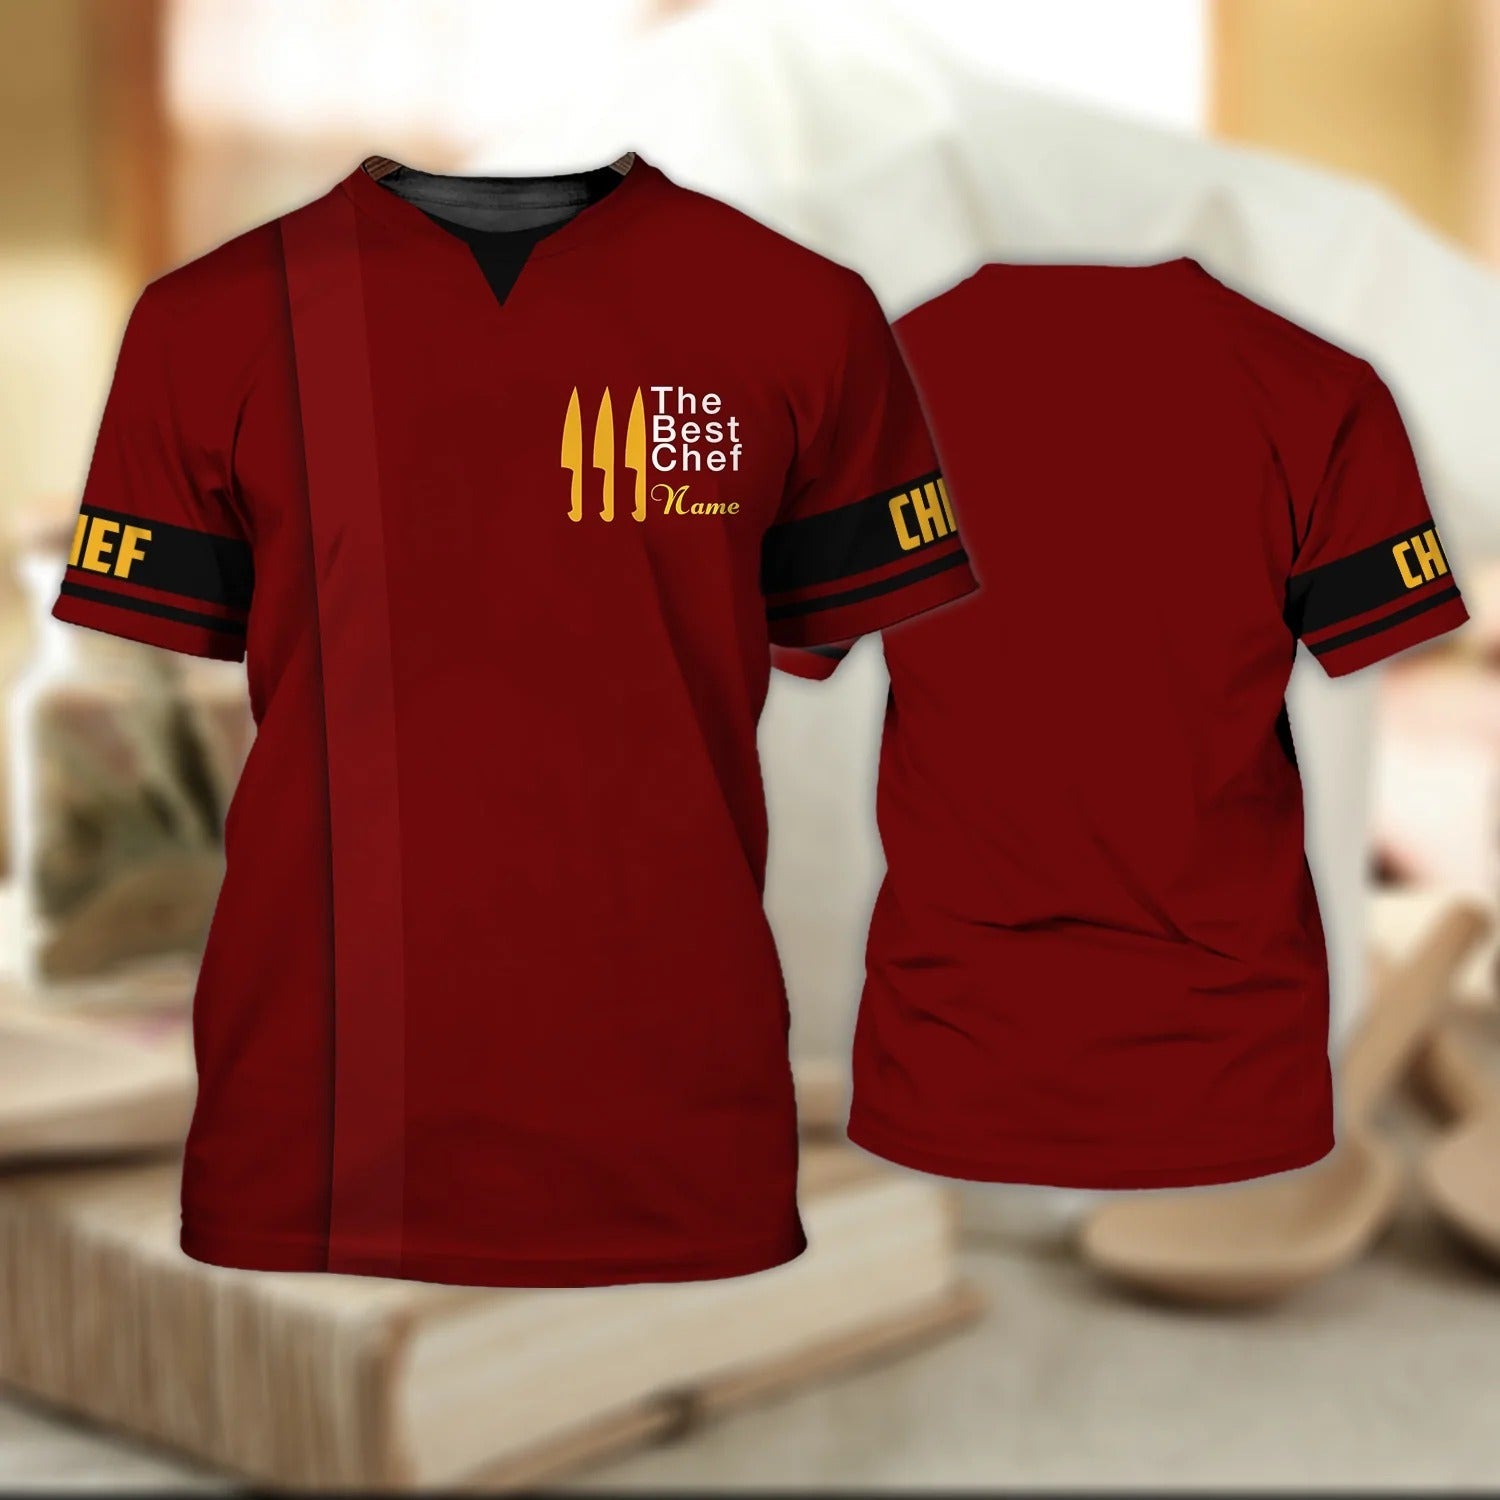 Custom Name 3D Full Printed Red Shirt For Chef/ The Best Chef T Shirt/ Chef Shirts